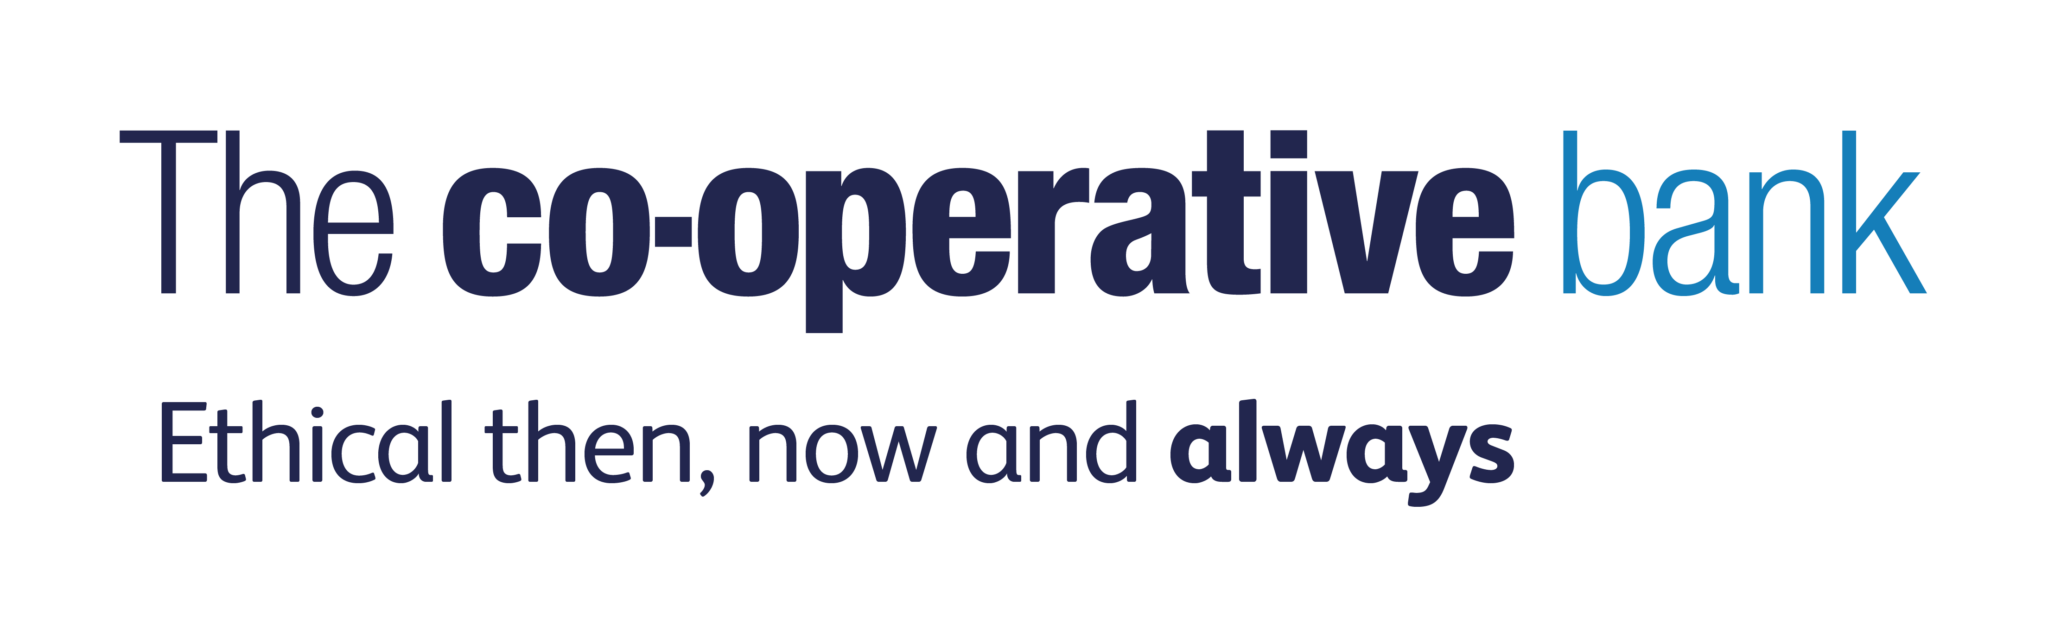 Supported by The Co-operative Bank